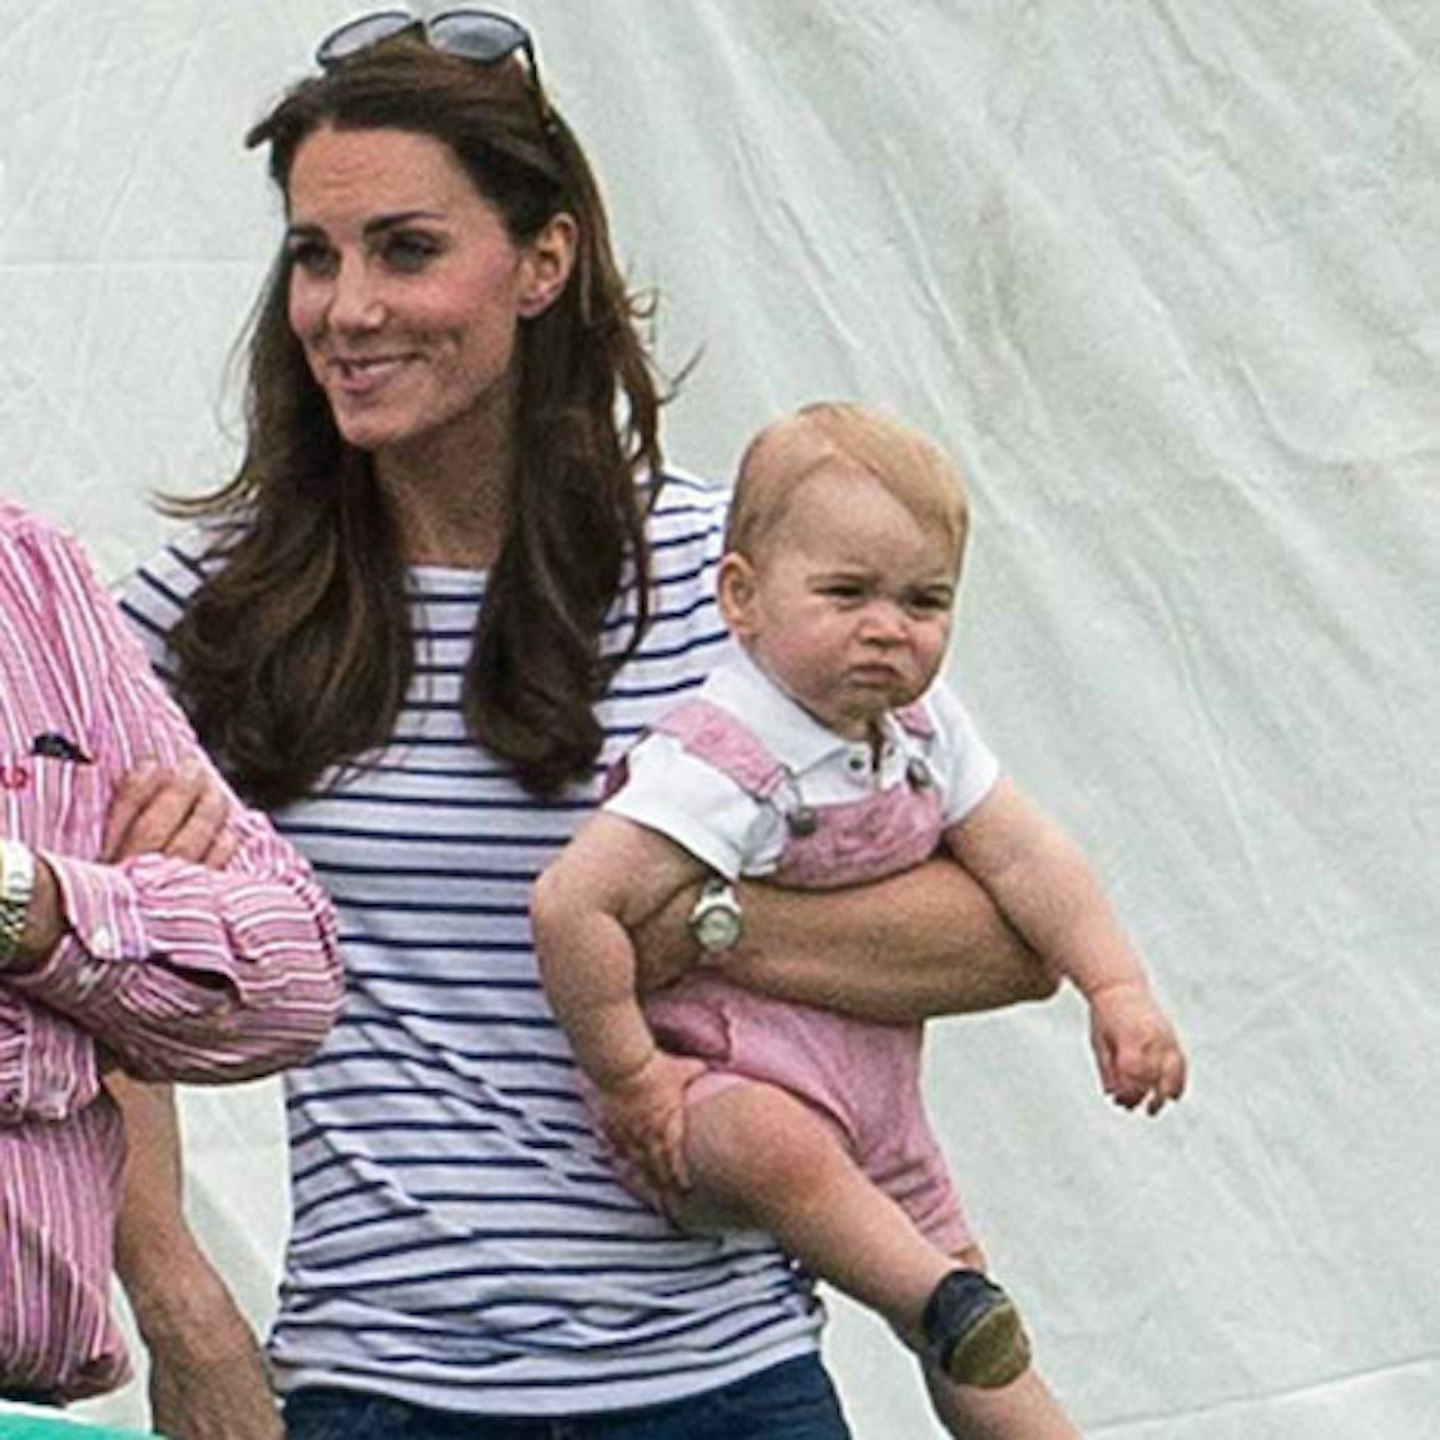 Prince George can't help but pull grumpy faces...